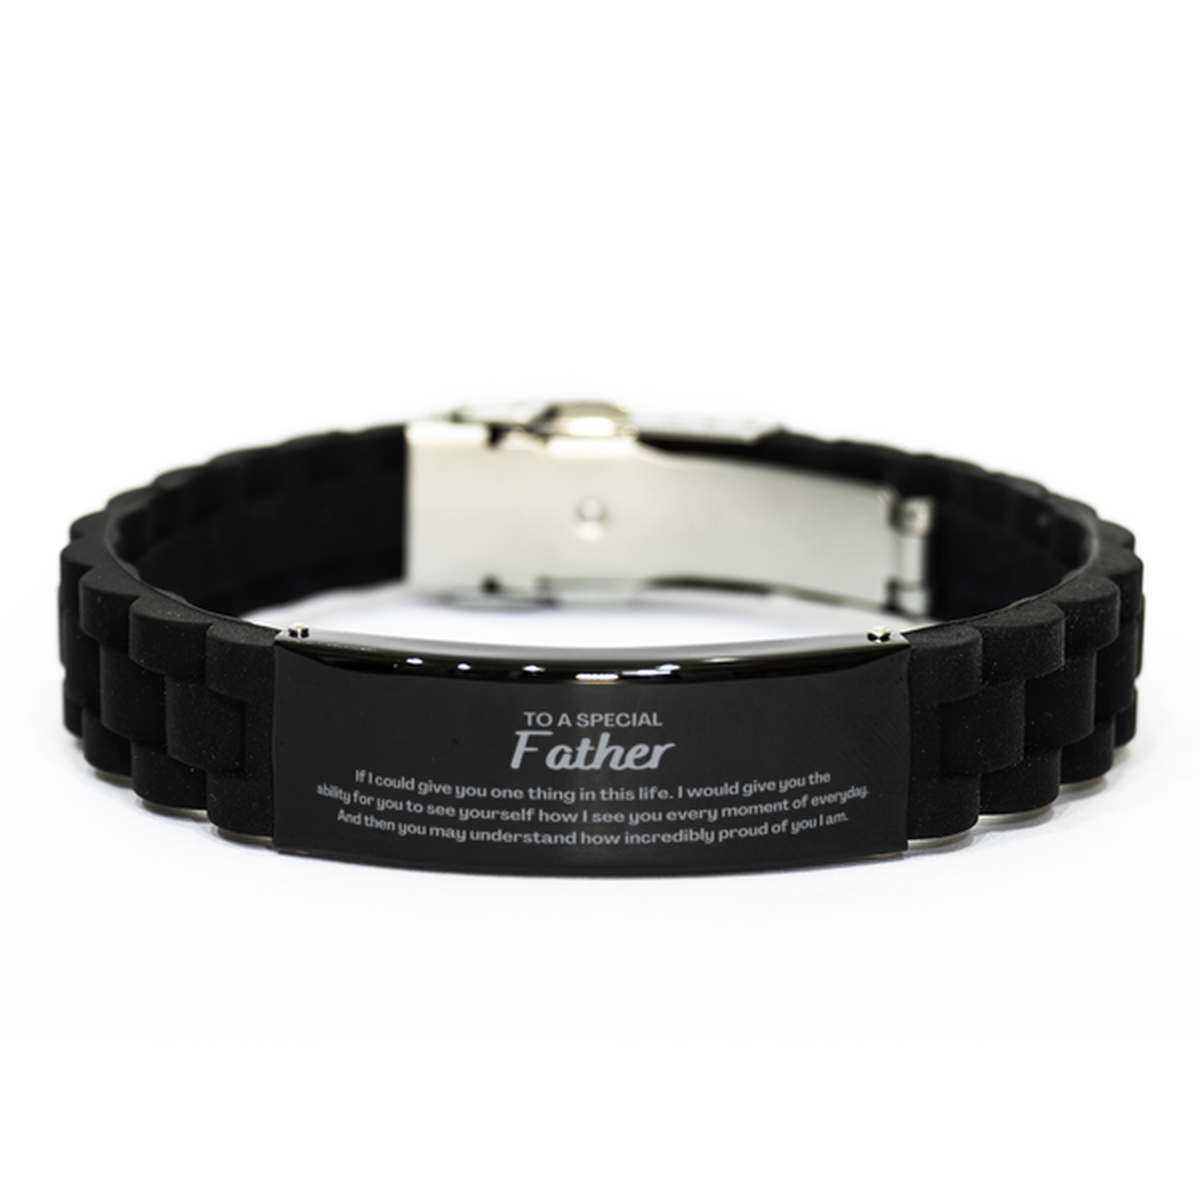 To My Father Black Glidelock Clasp Bracelet, Gifts For Father Engraved, Inspirational Gifts for Christmas Birthday, Epic Gifts for Father To A Special Father how incredibly proud of you I am